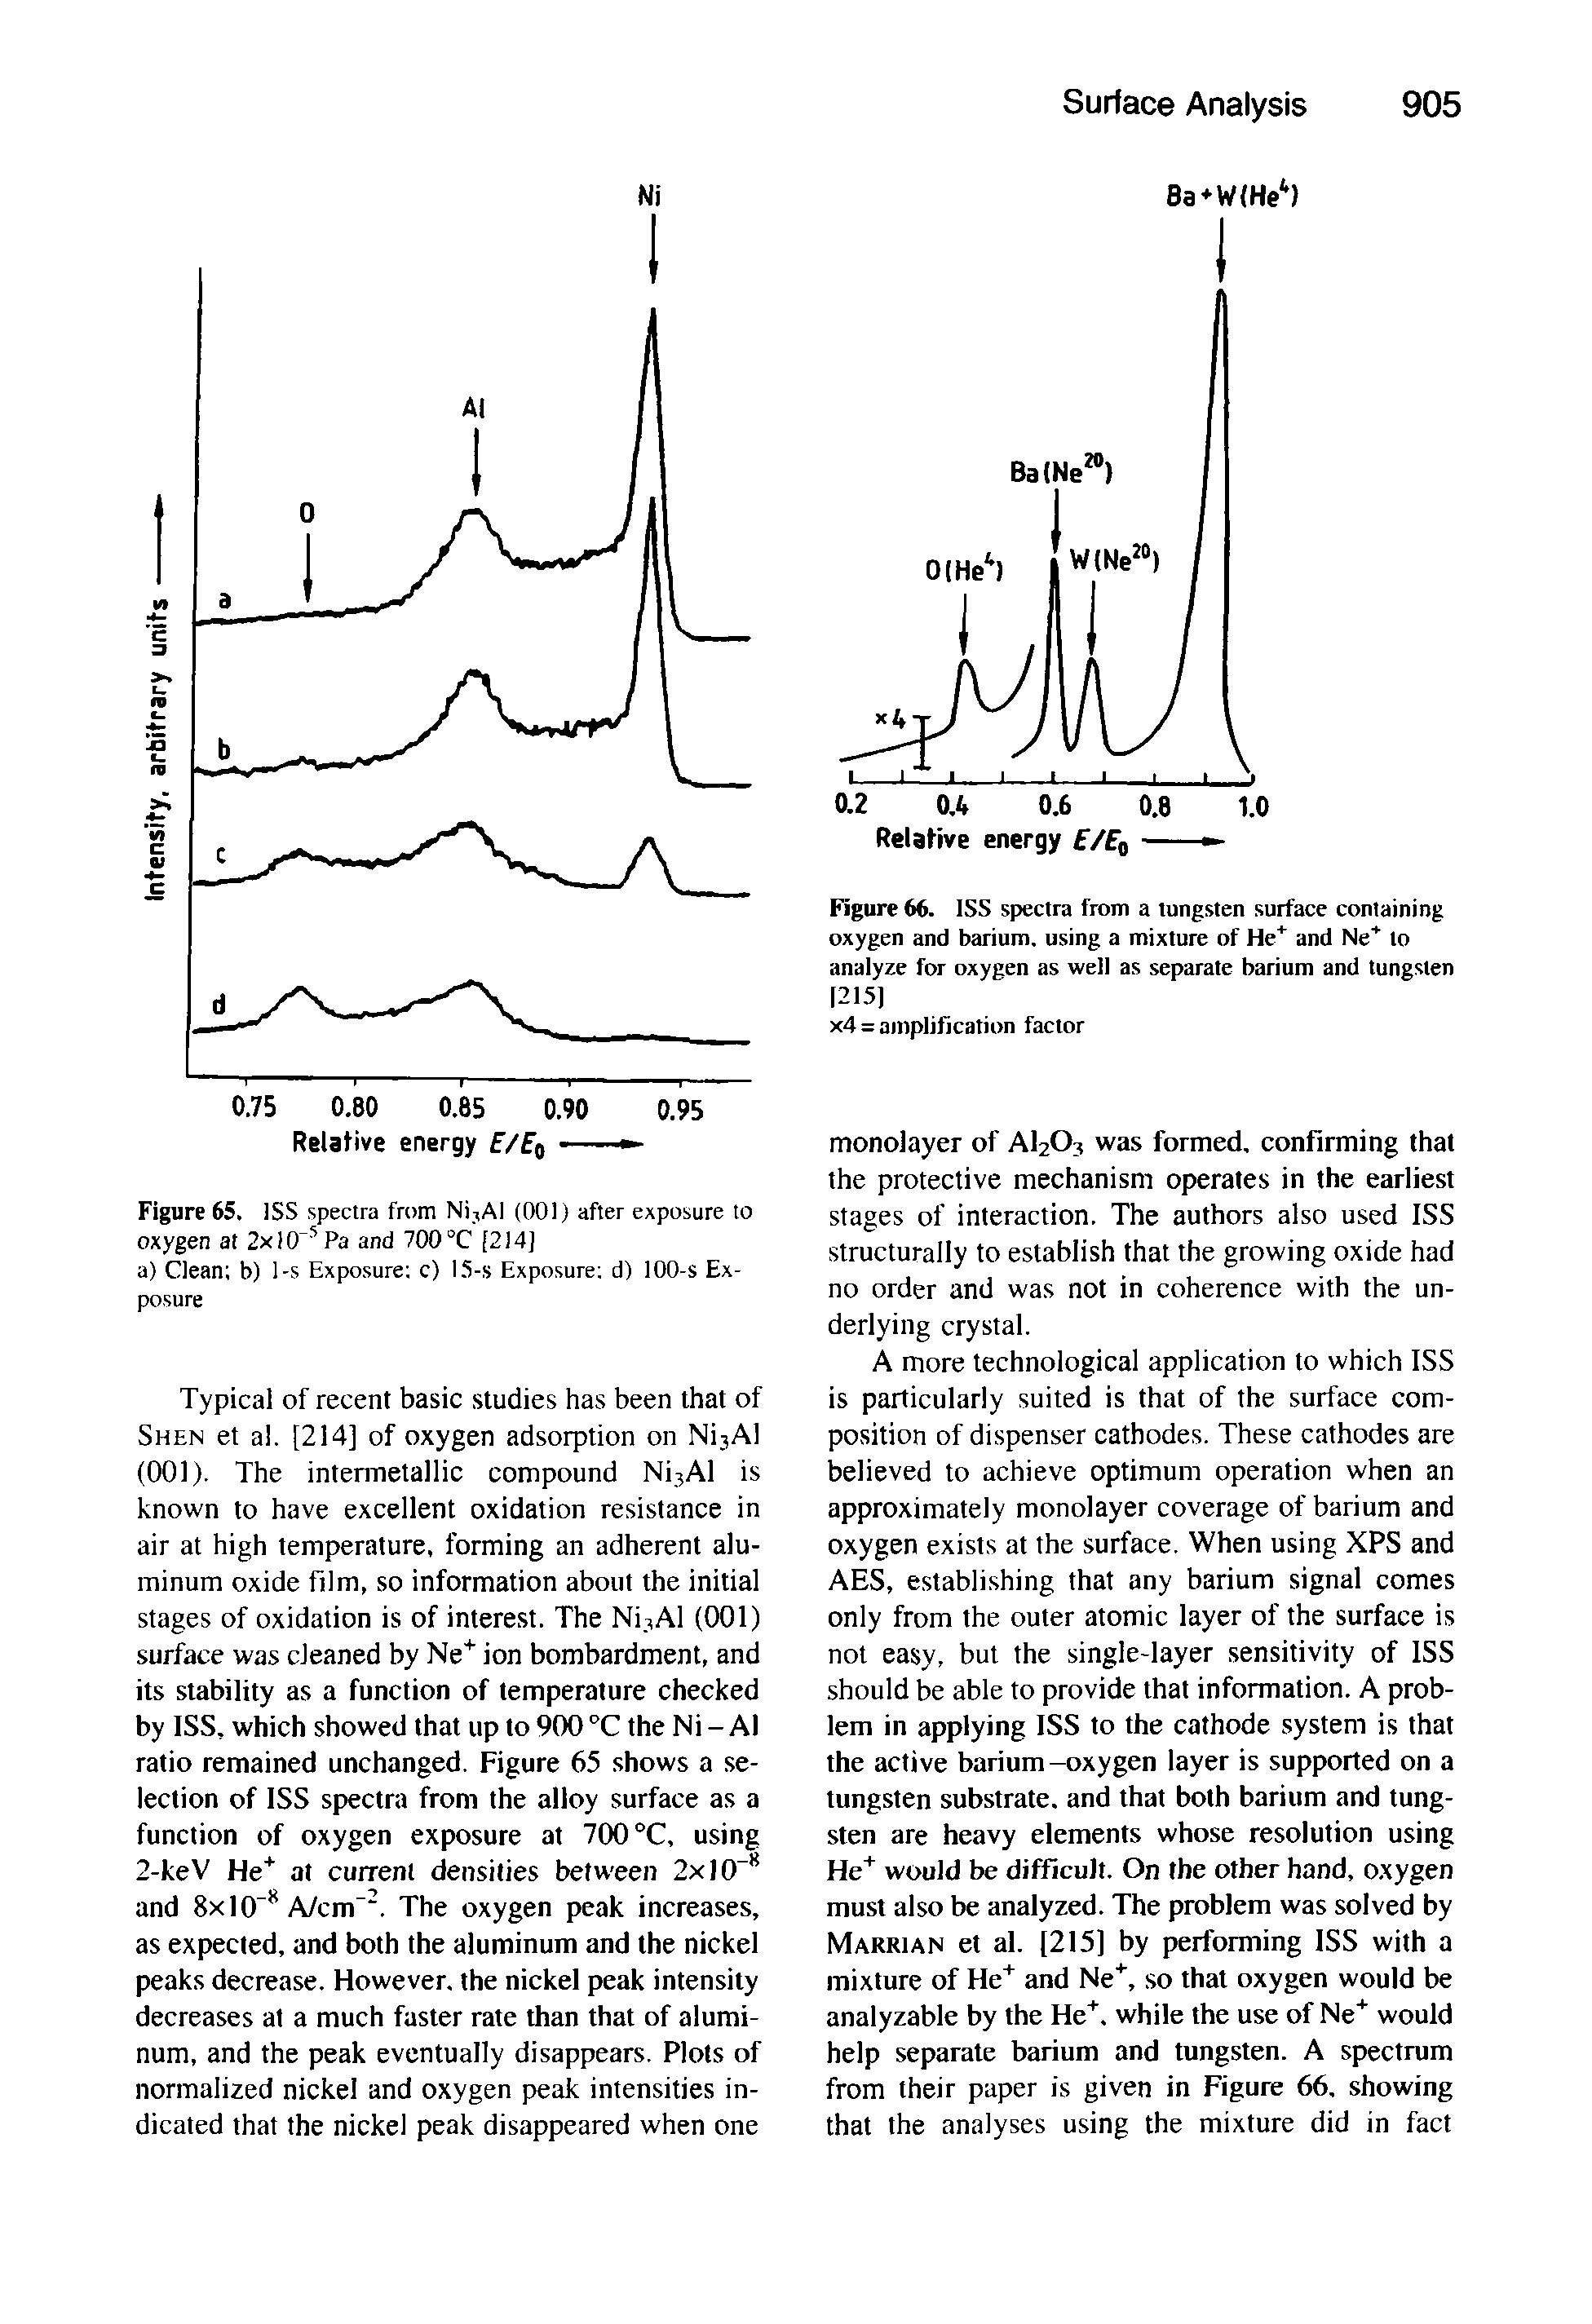 Figure 66. ISS spectra from a tungsten surface containing oxygen and barium, using a mixture of He and Ne to analyze for oxygen as well as separate barium and tungsten 1215]...